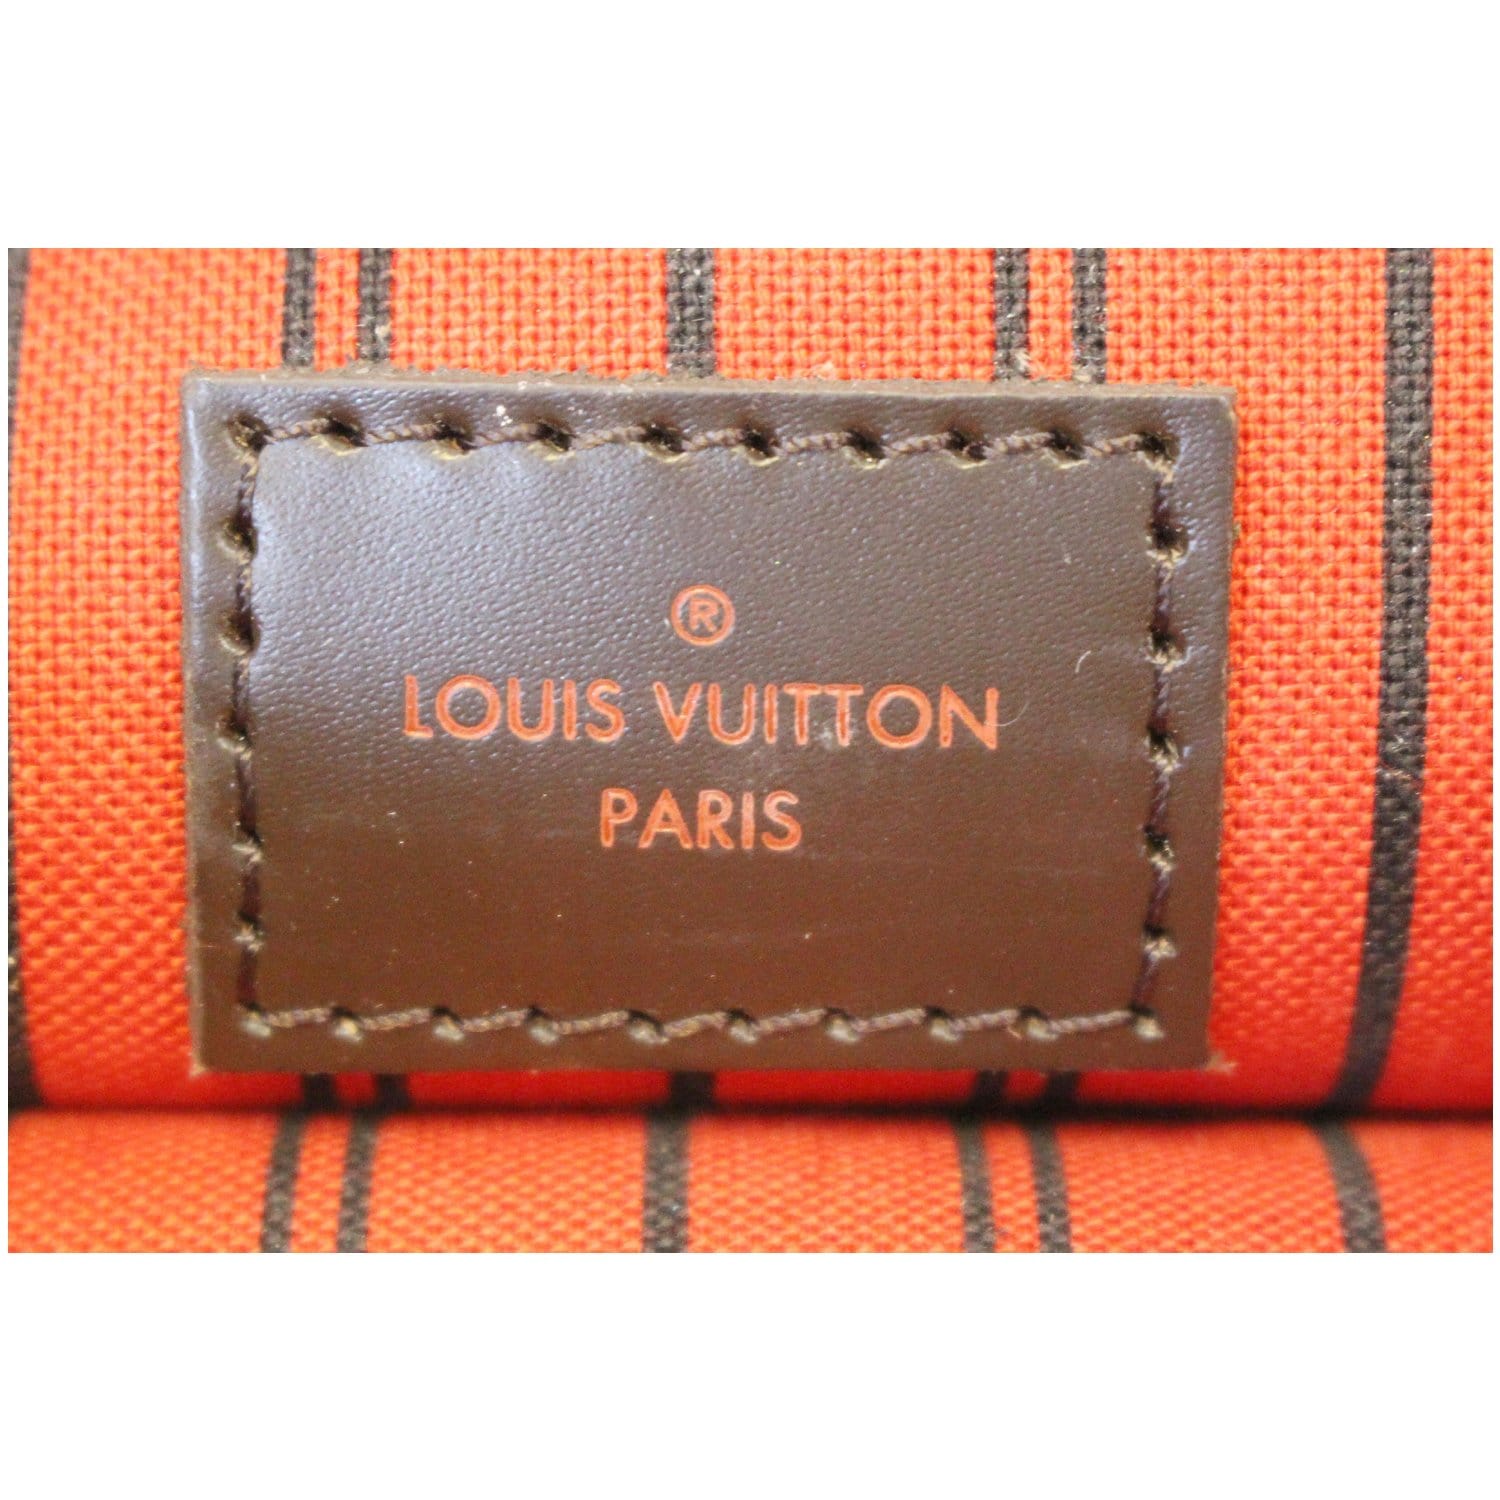 Only 195.00 usd for Louis Vuitton Damier Ebene Wristlet Online at